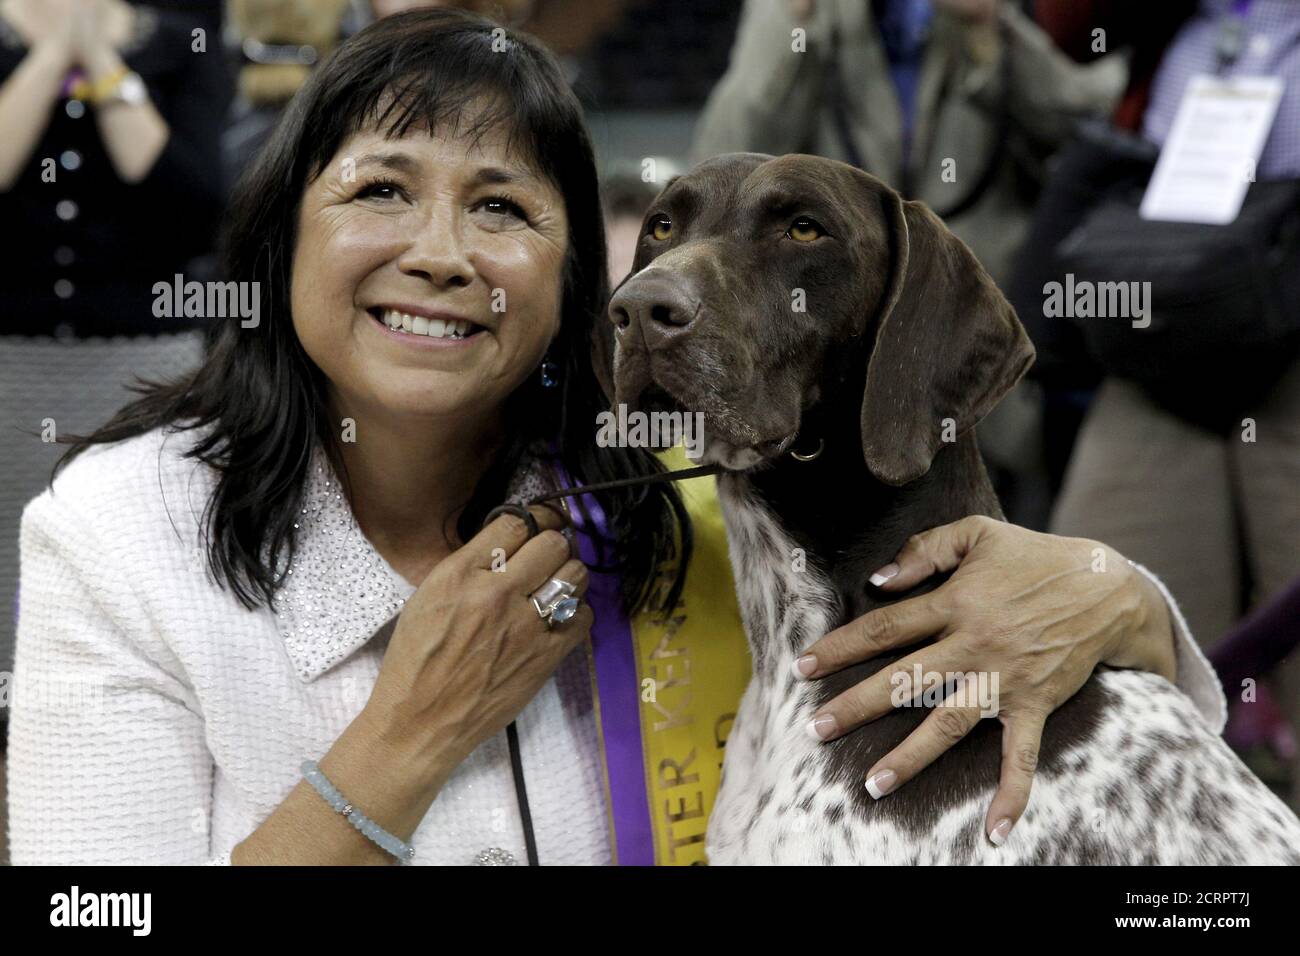 Handler Valerie Nunez Atkinson poses with CJ, a German Shorthaired Pointer from the Sporting Group, after they won Best in Show at the Westminster Kennel Club Dog show at Madison Square Garden in New York February 16, 2016. REUTERS/Brendan McDermid Stock Photo